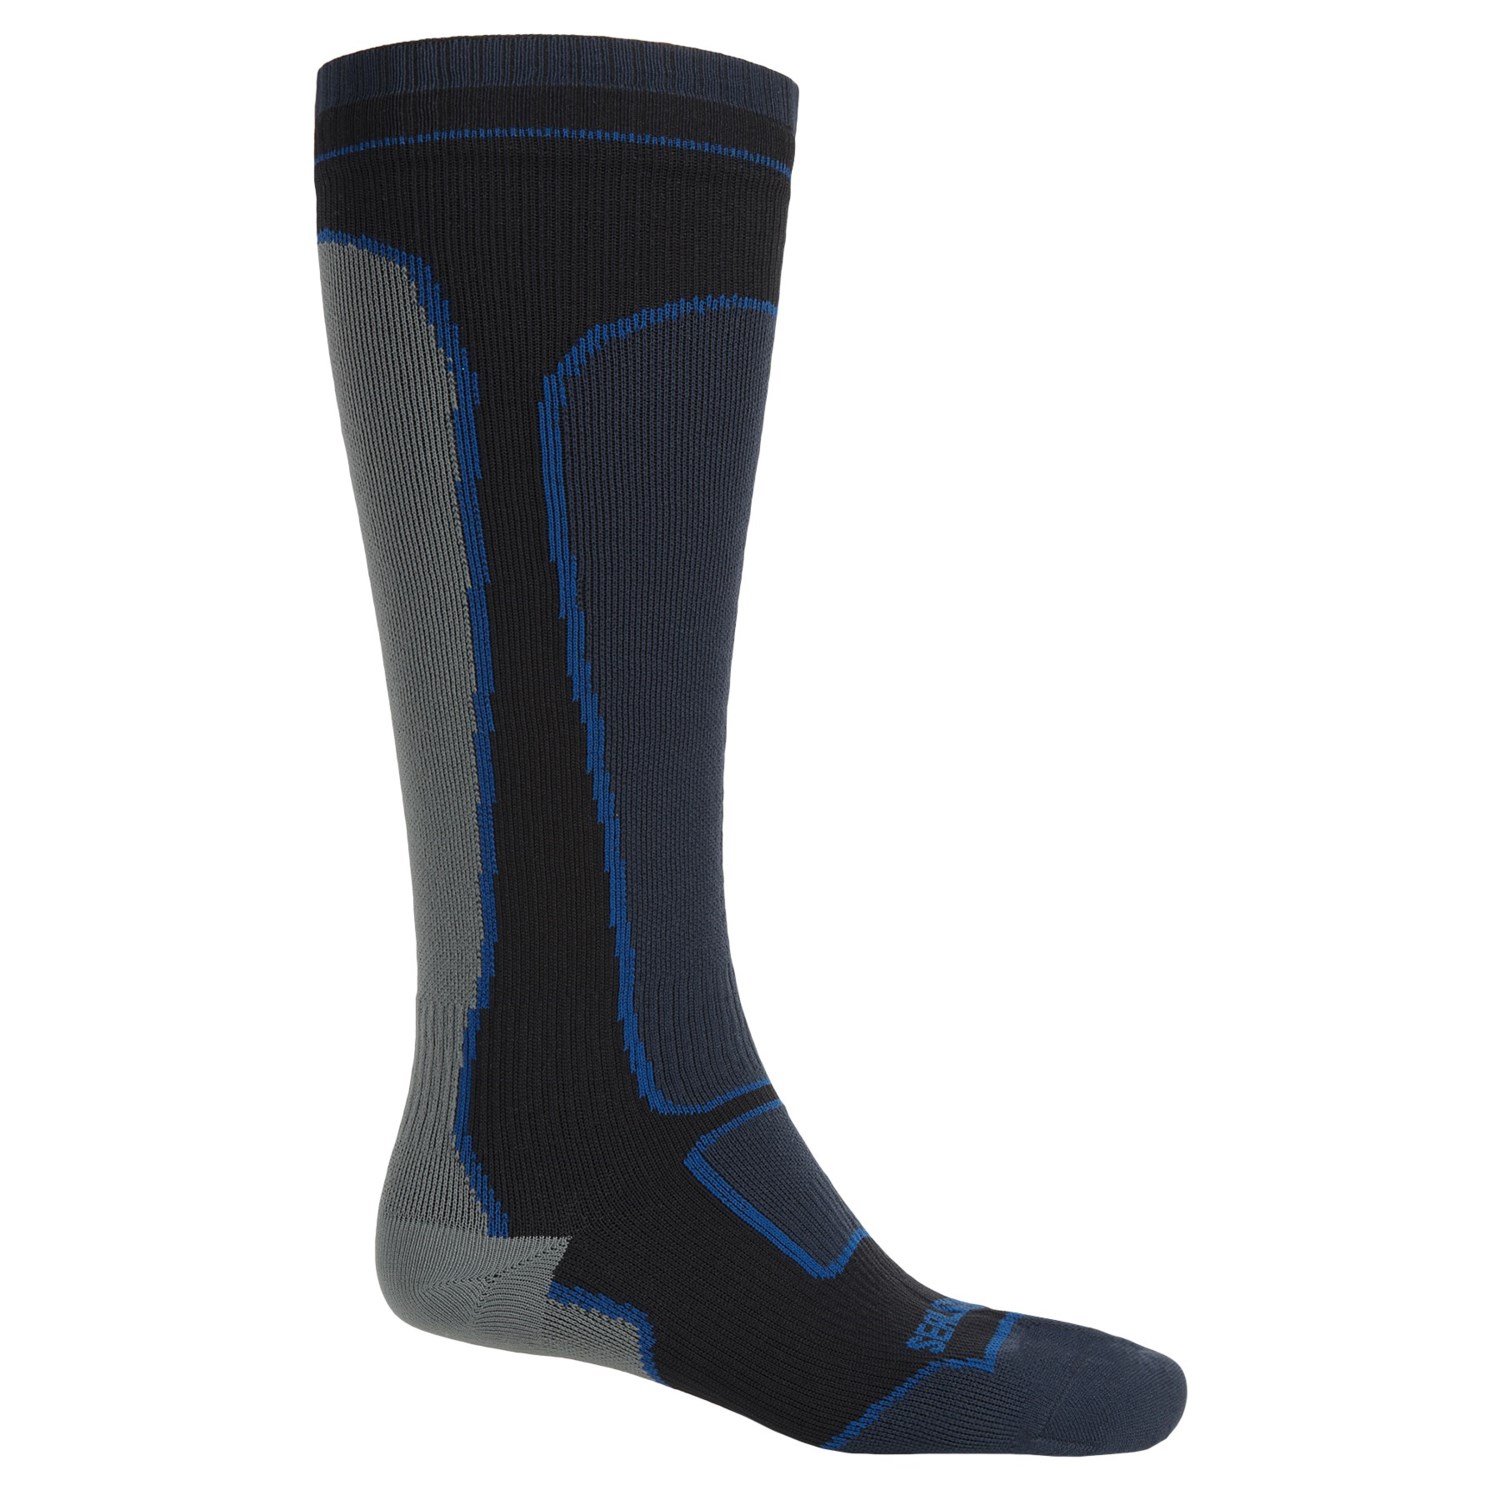 SealSkinz Midweight Waterproof Socks (For Men and Women) - Save 48%